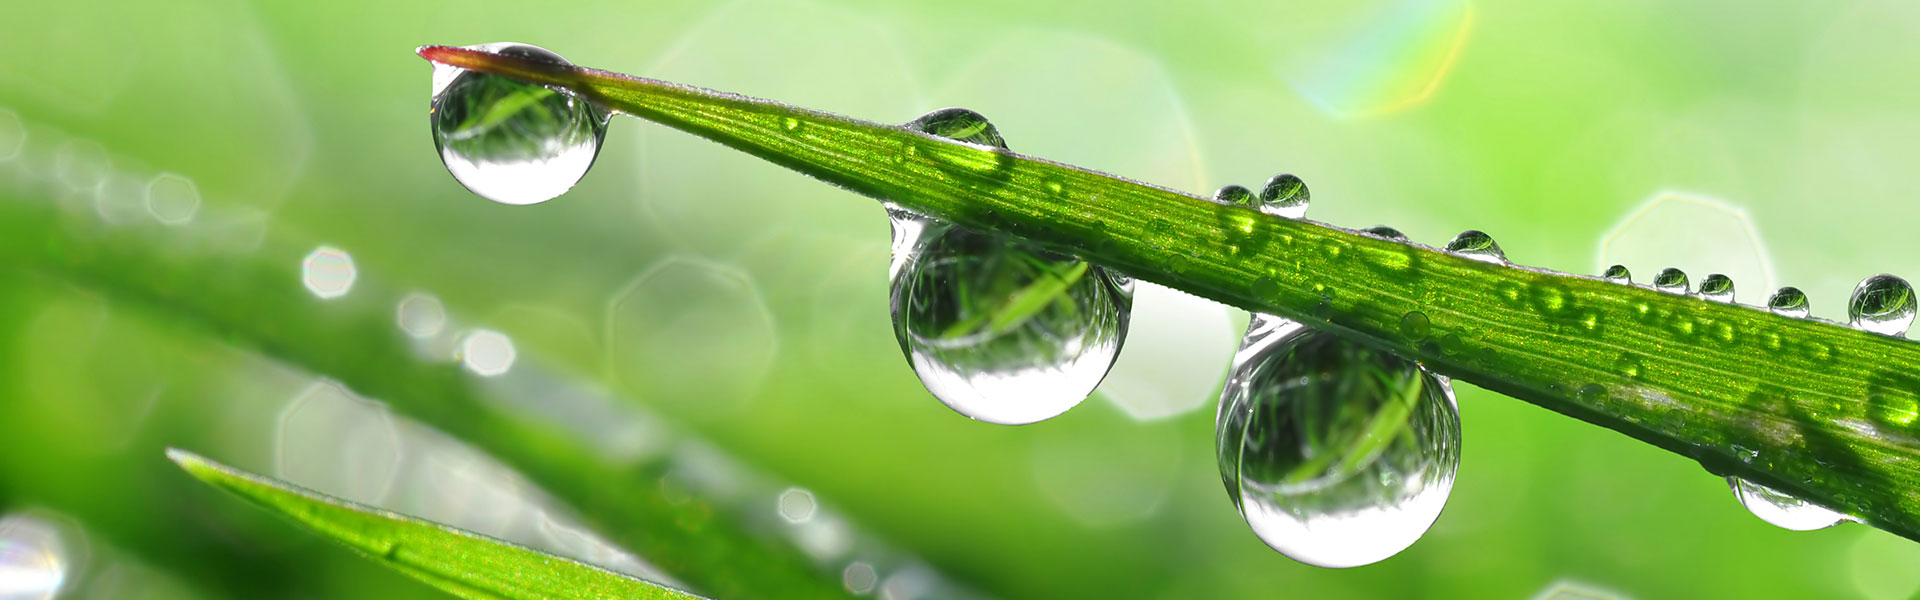 Kelowna Irrigation Repair helps you go green through a variety of water conservation choices.